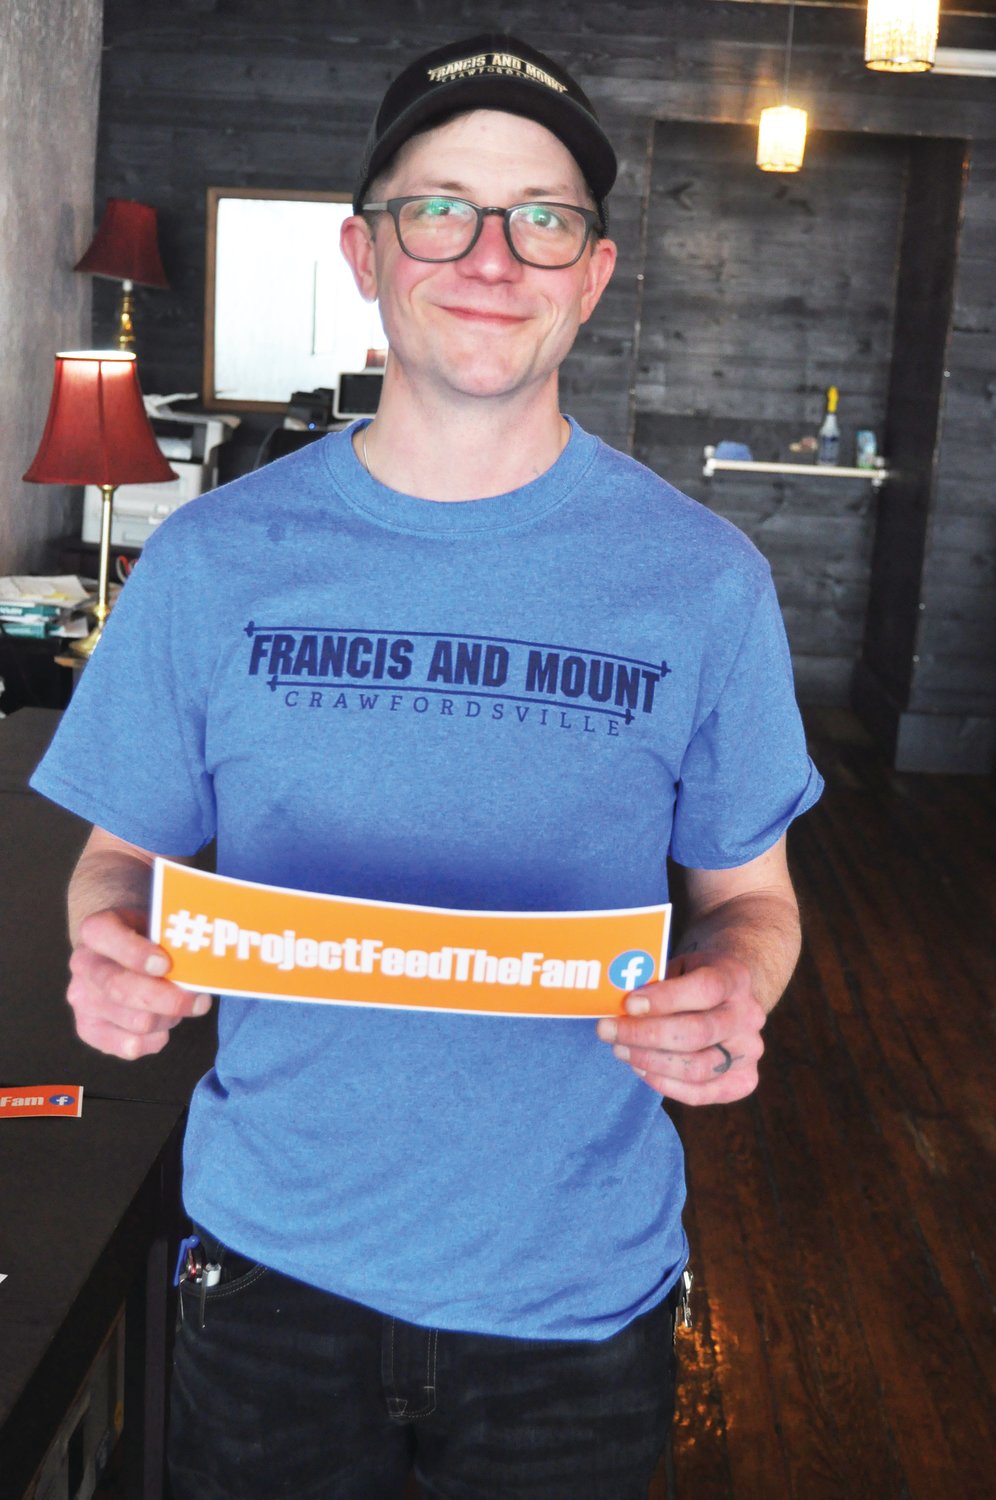 Isaac Weliver, owner of Francis & Mount, shows one of the bumper stickers promoting the #ProjectFeedtheFaM that are available for sale. The restaurant has fed more than 300 people through donated meals with support from local businesses.